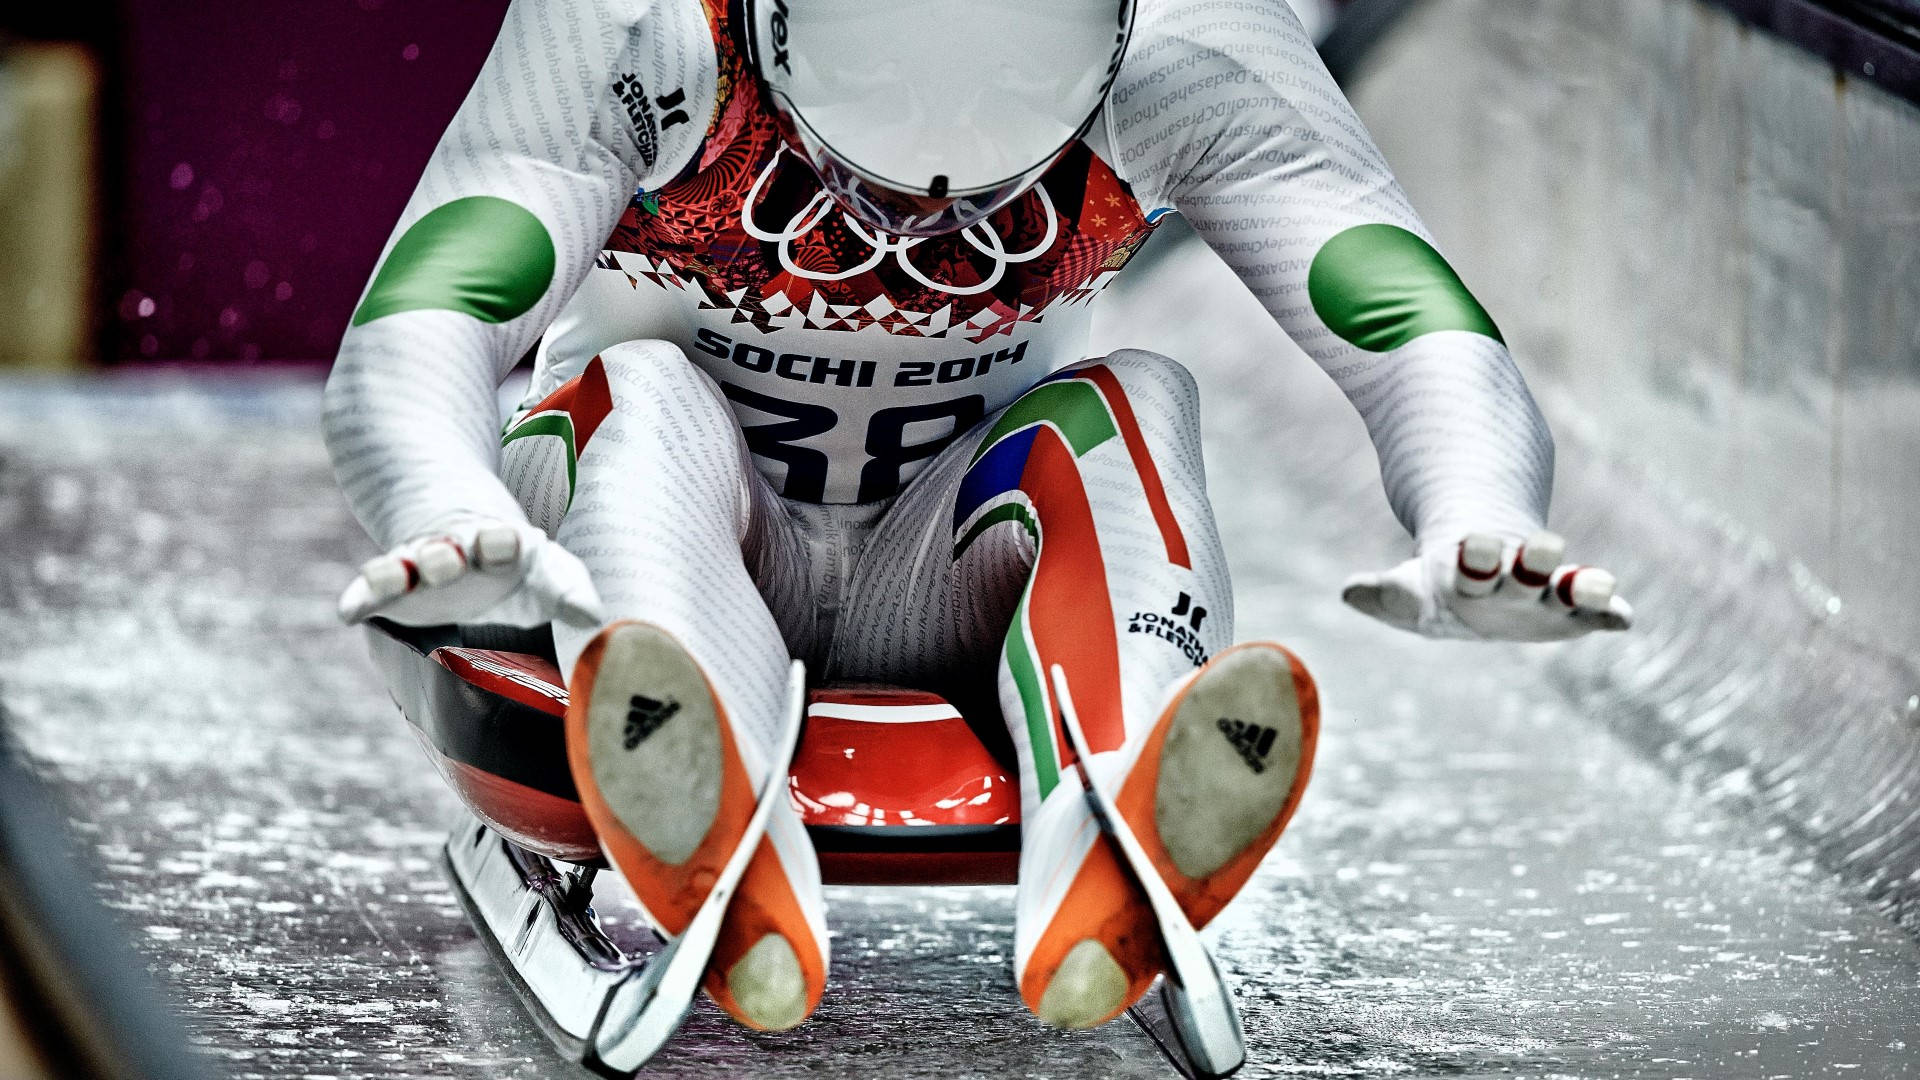 Luge Competitor At The 2014 Sochi Winter Olympics Wallpaper